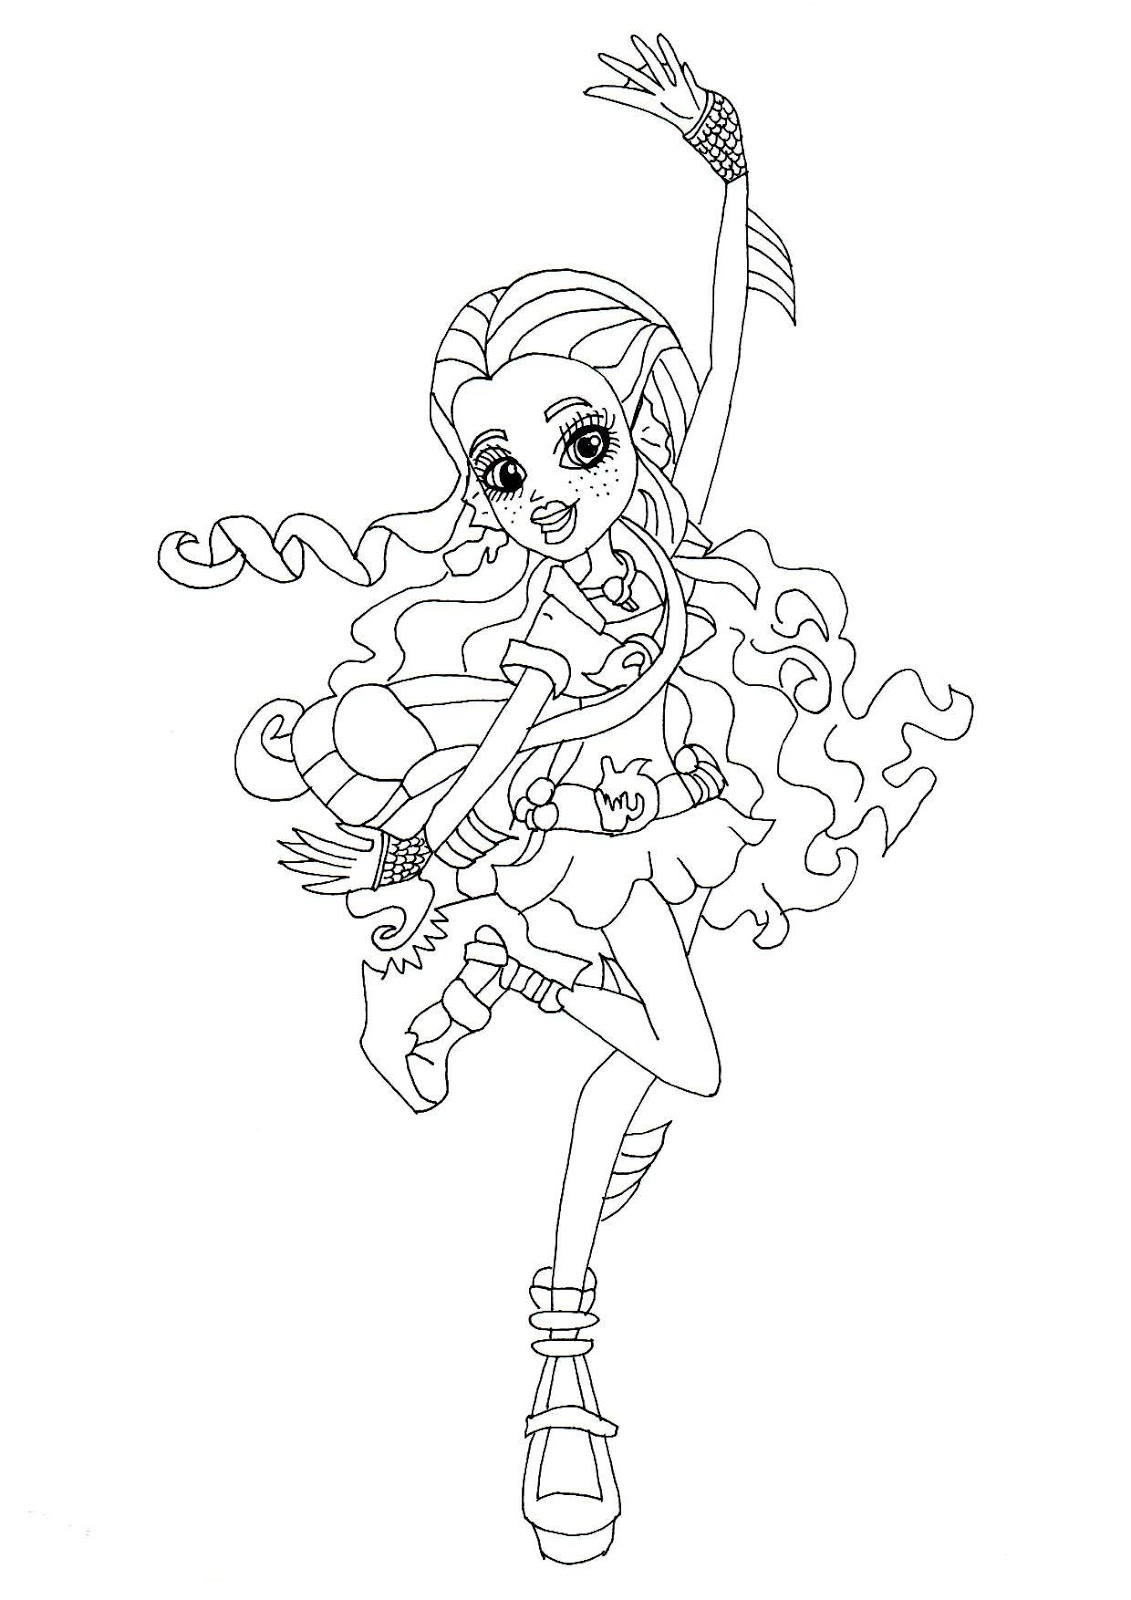 Free printable monster high Lagoona Blue ghouls night out coloring page